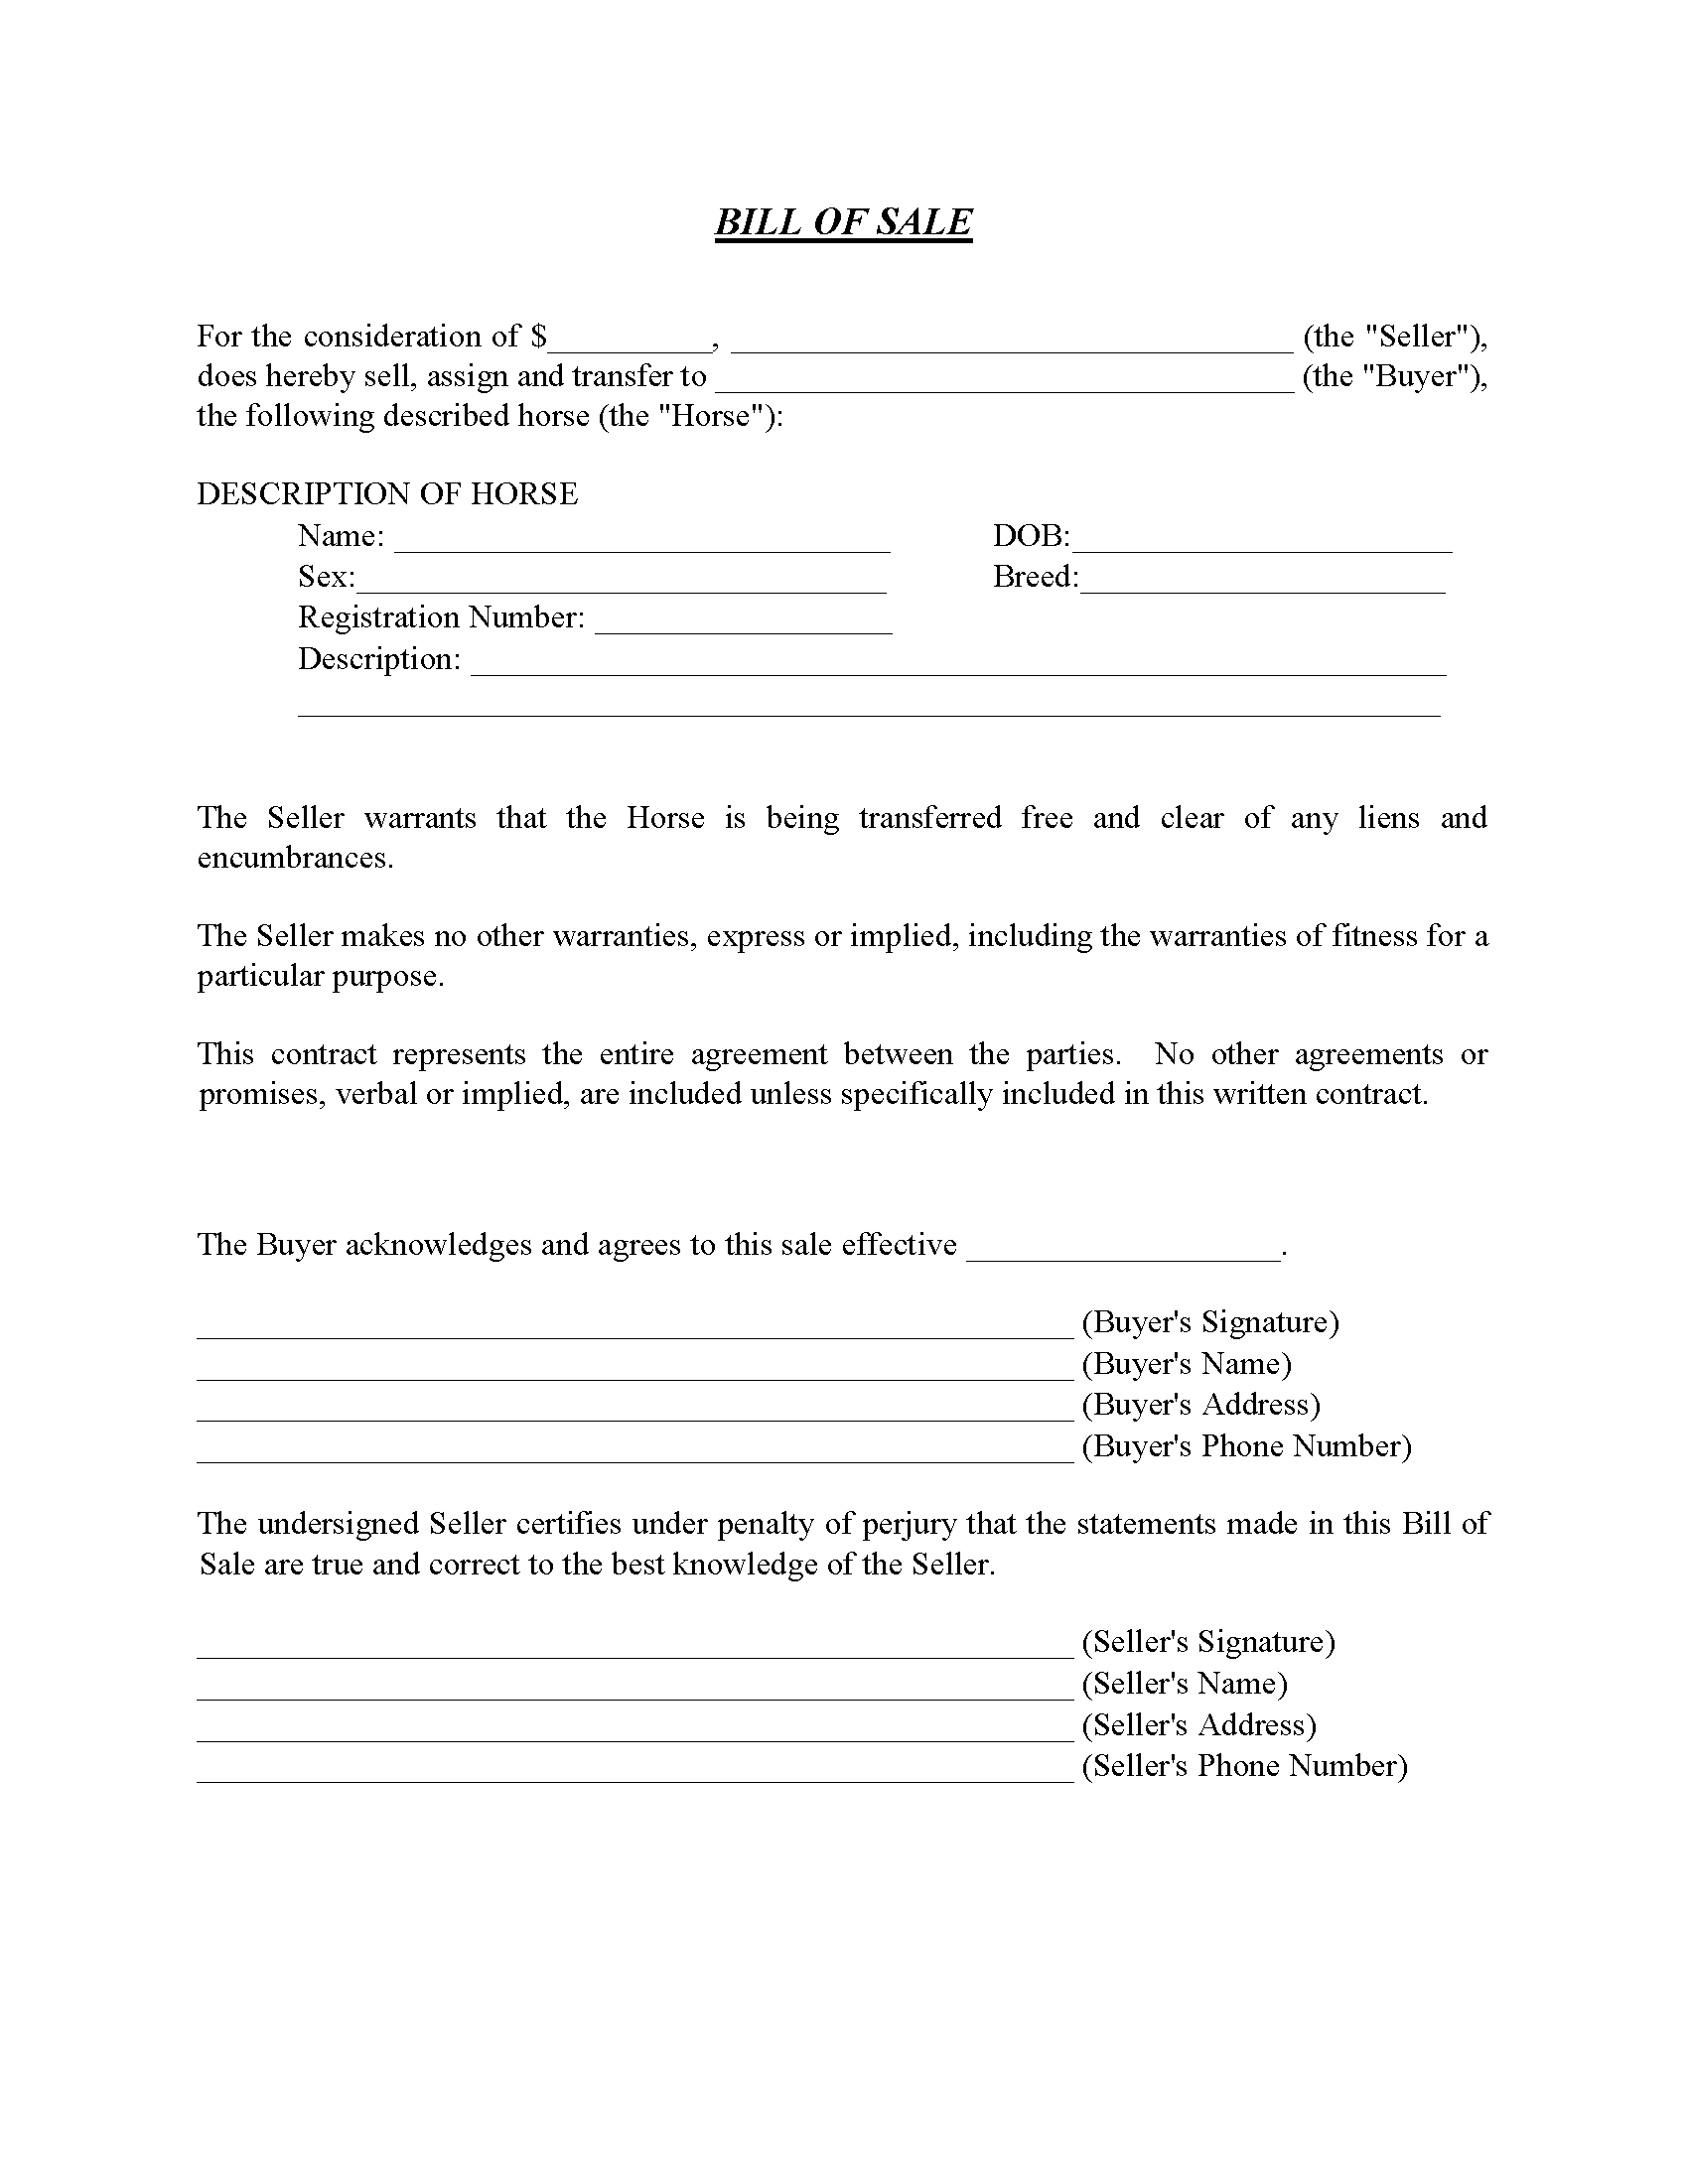 free-9-horse-bill-of-sale-templates-in-ms-word-pdf-free-horse-bill-of-sale-form-word-pdf